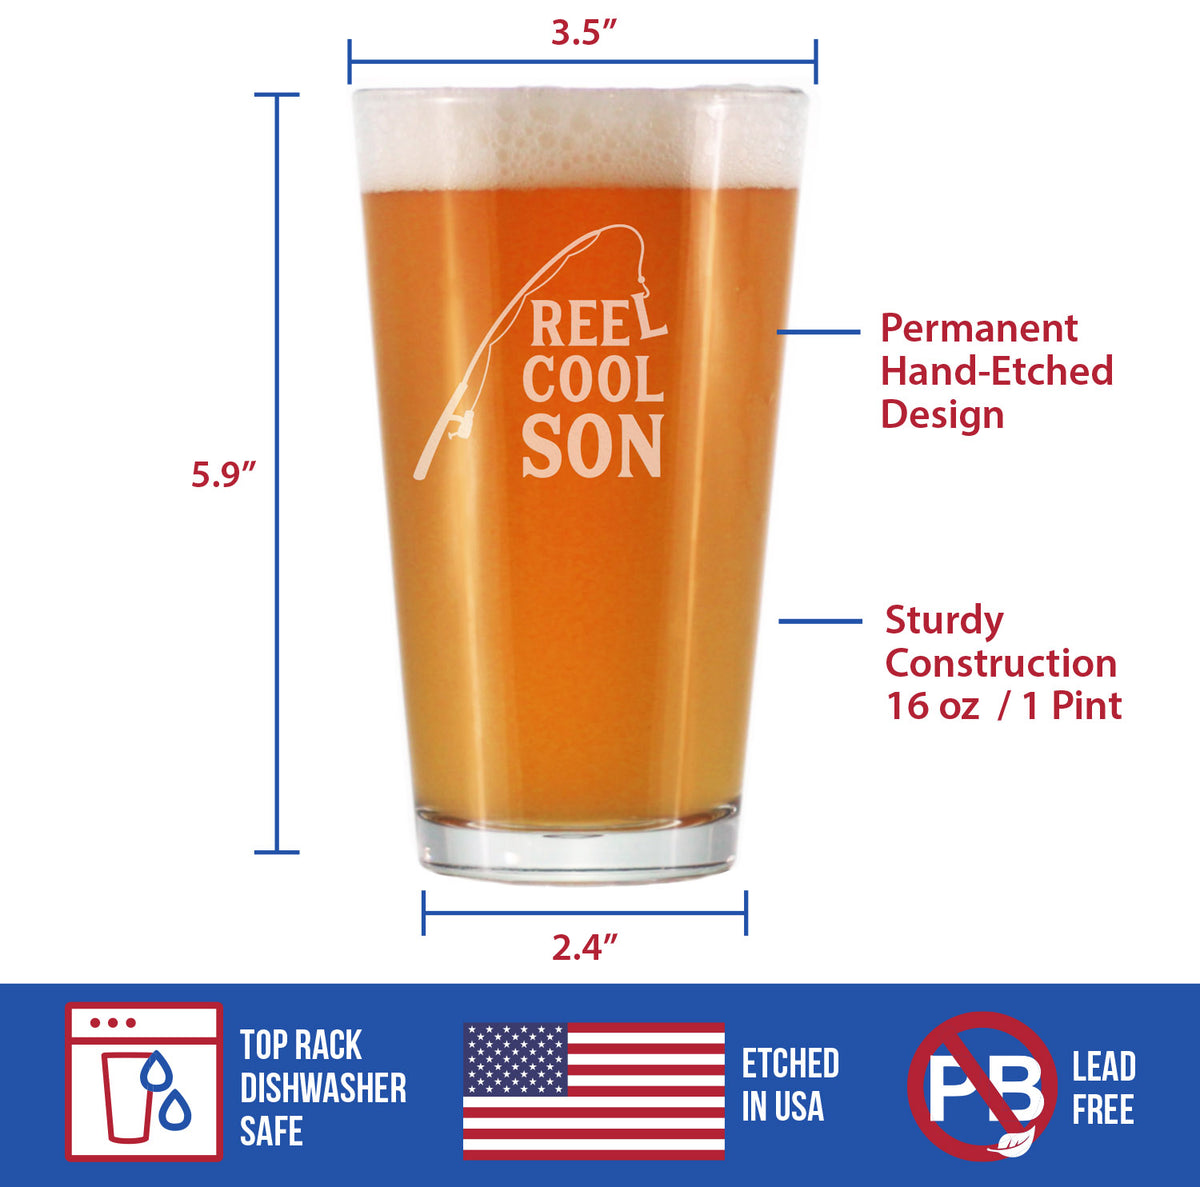 Reel Cool Son - 16 Ounce Pint Glass